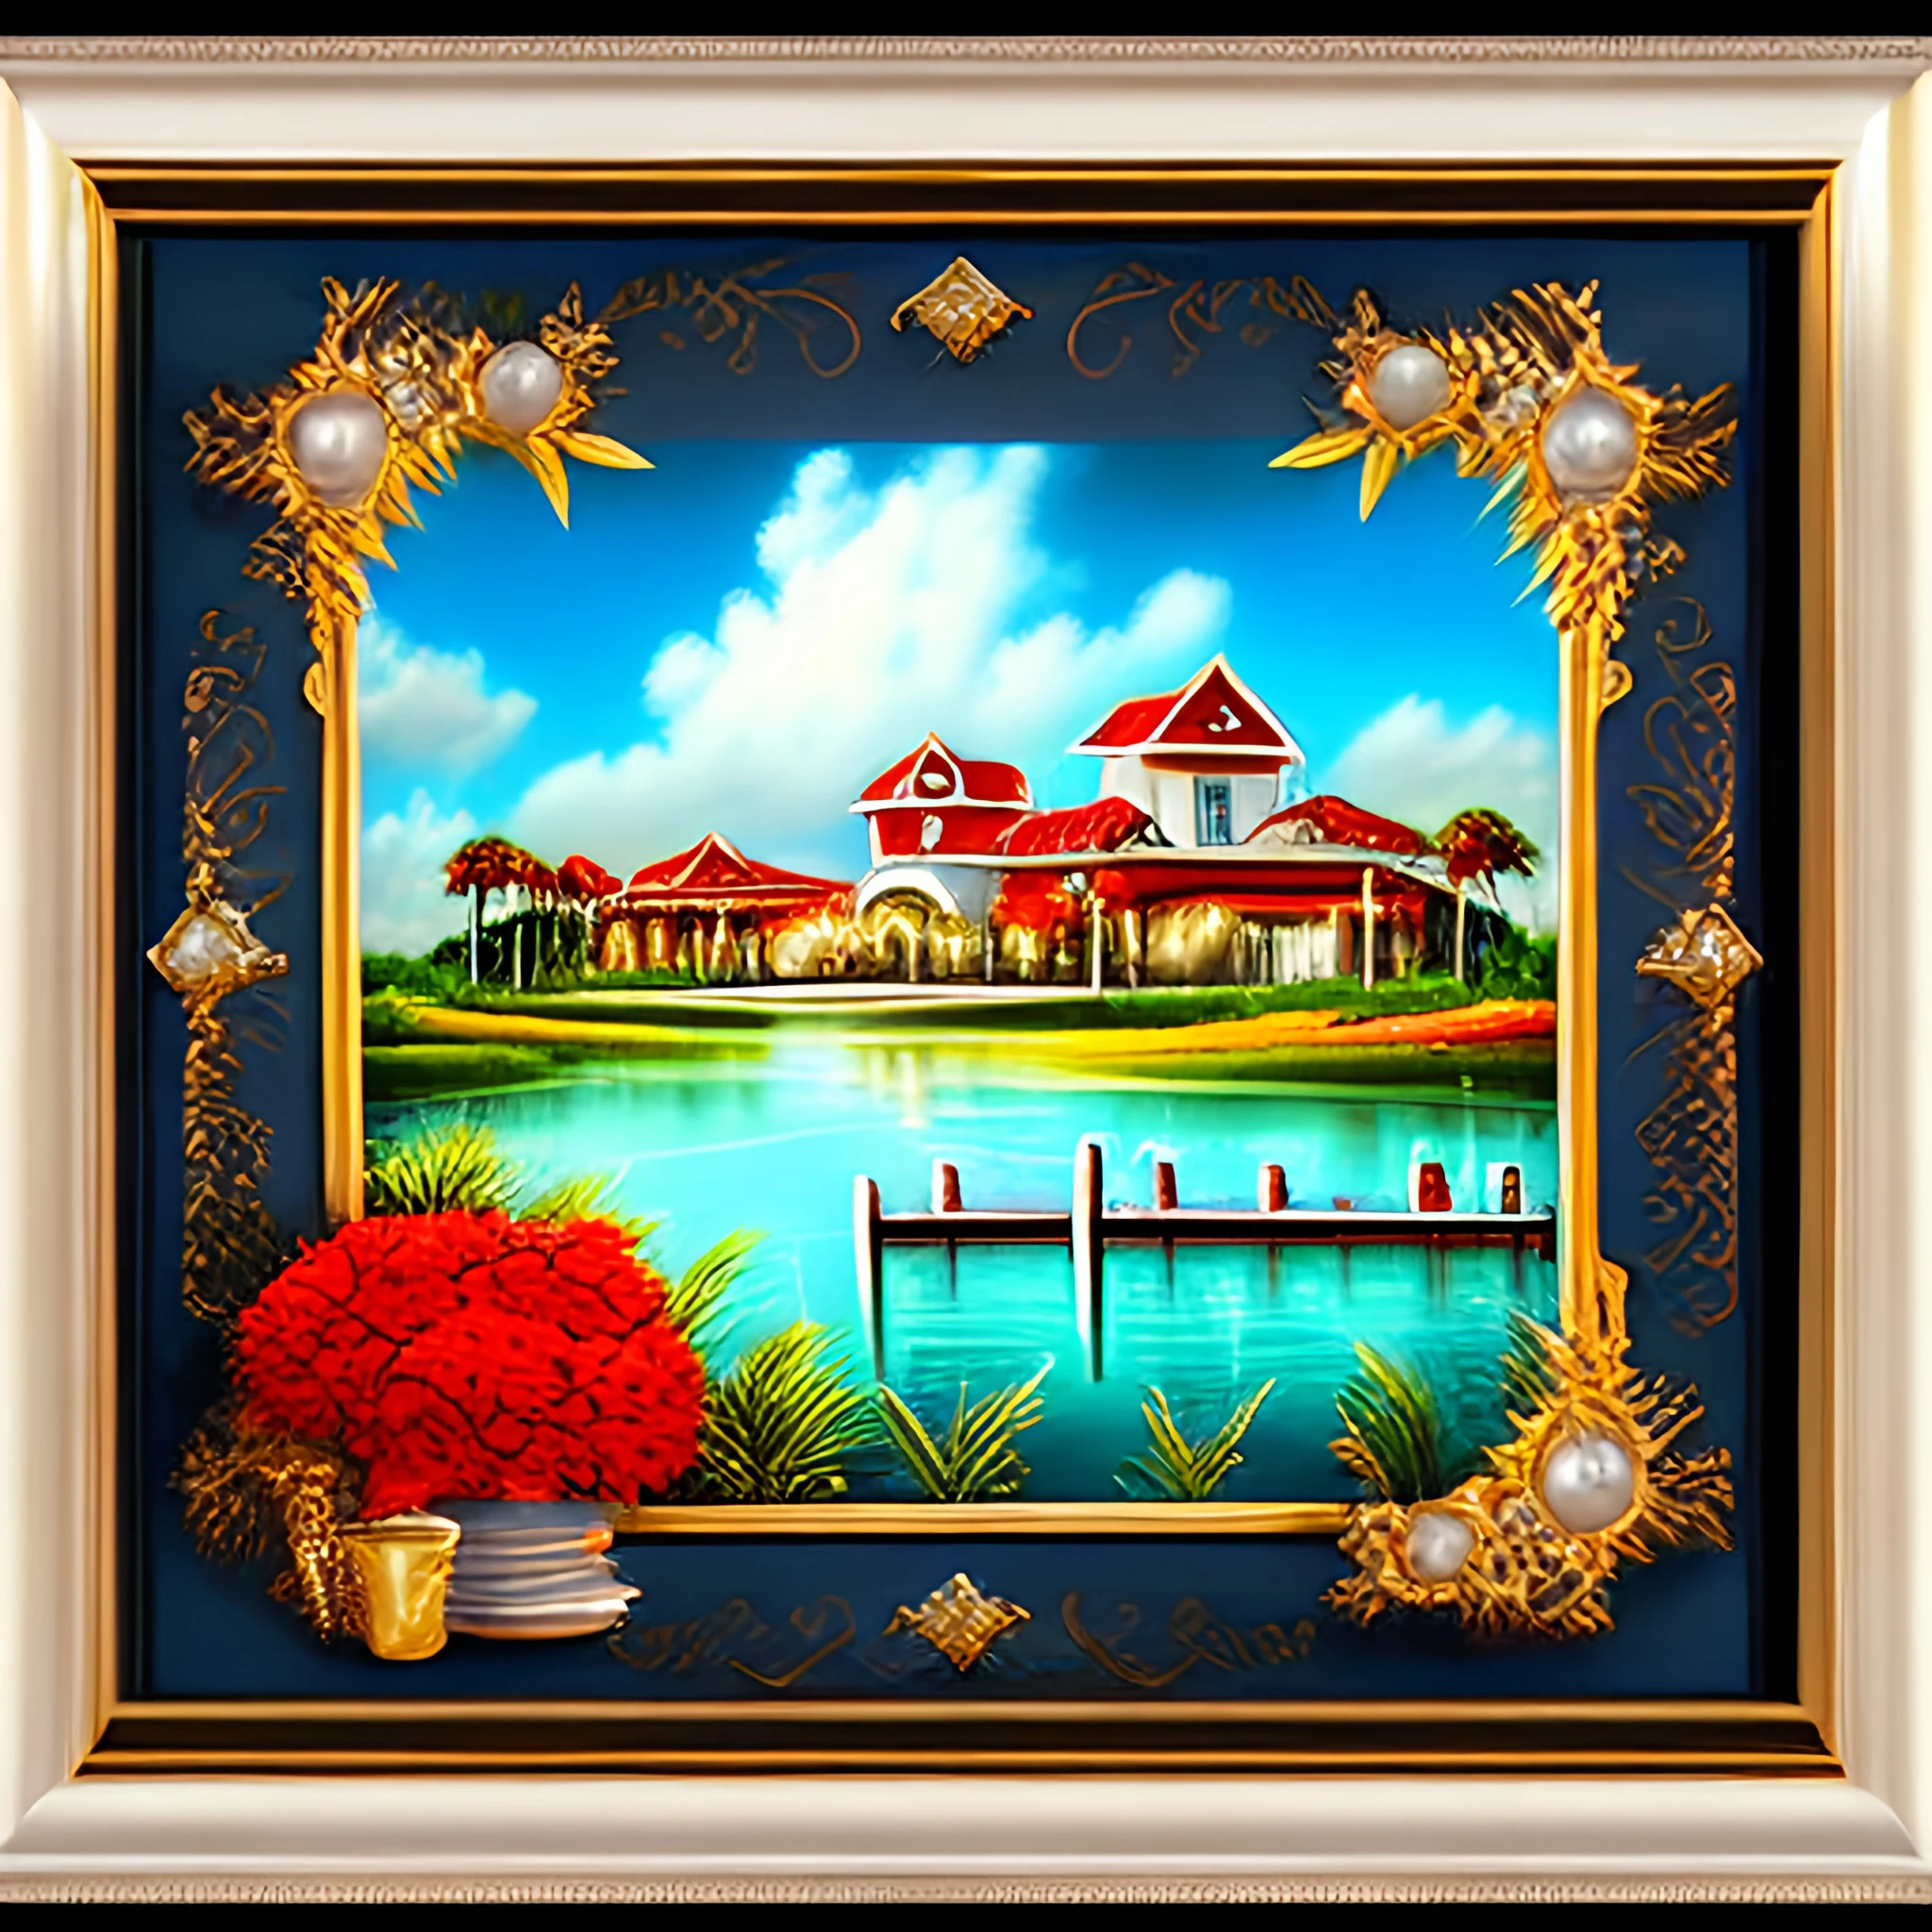 In Florida, where can I contact regarding diamond painting paying persons under the table